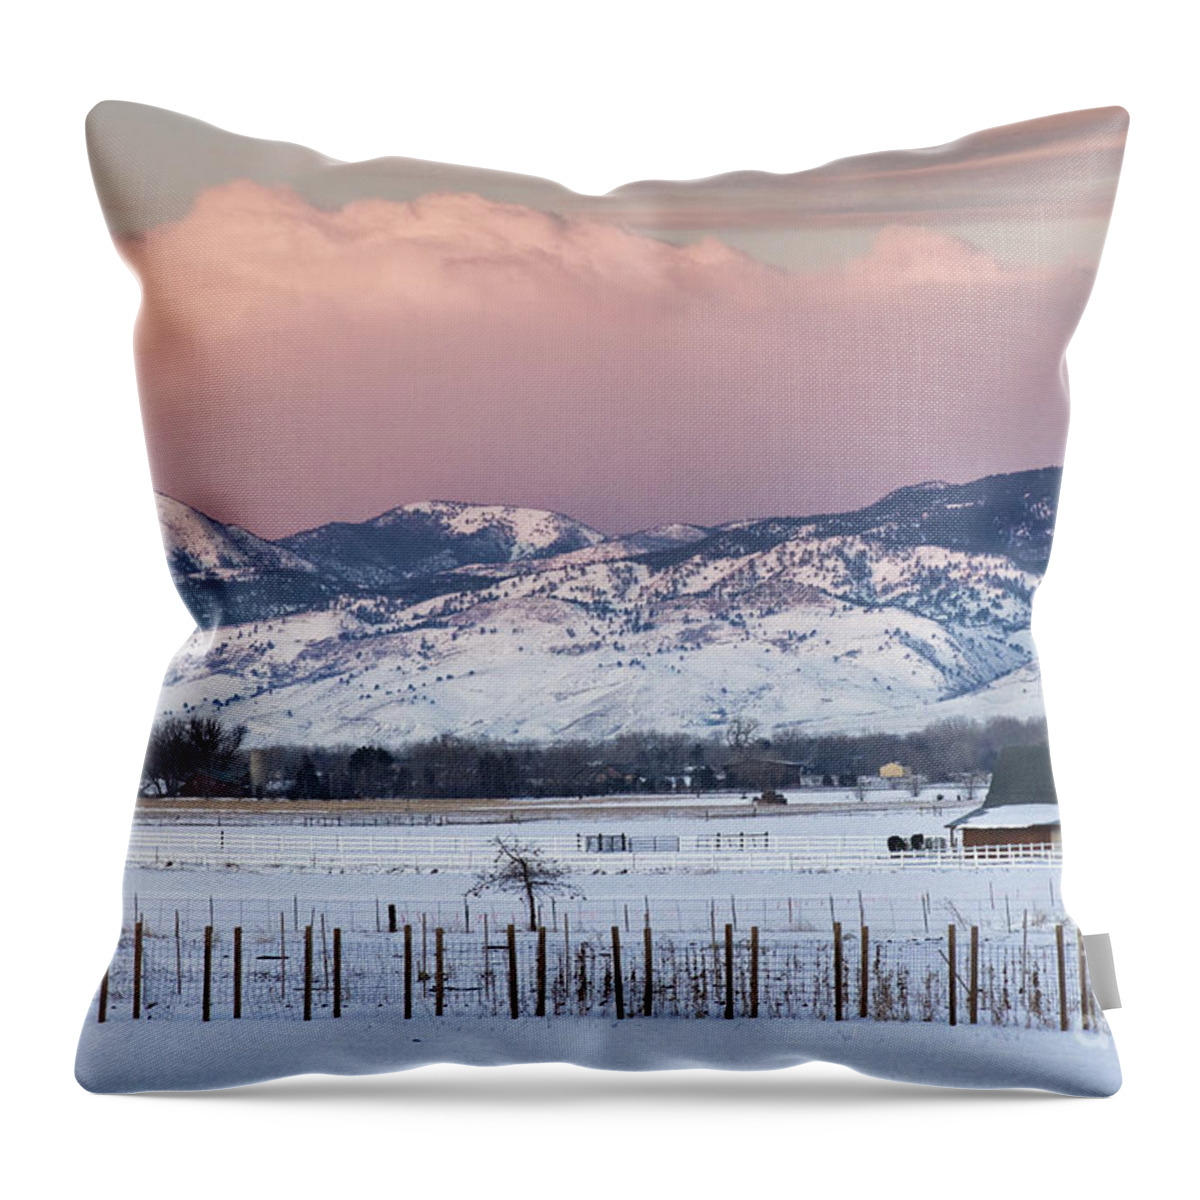 Sunrise Throw Pillow featuring the photograph Colorado Rocky Mountain Sunrise by James BO Insogna